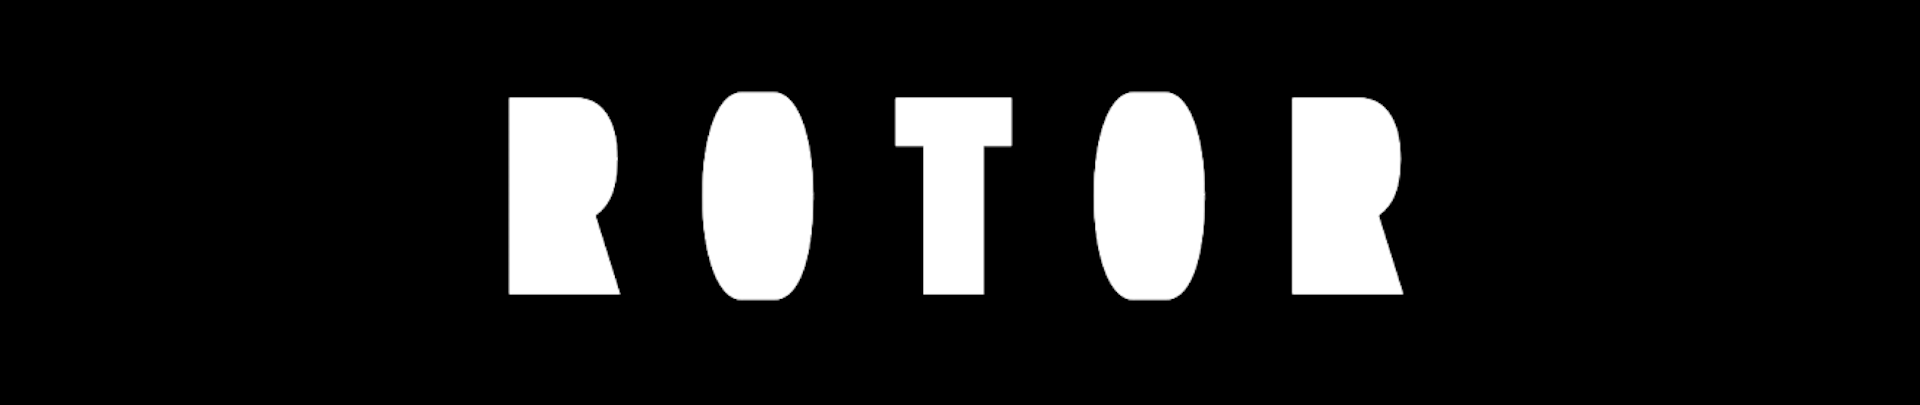 Black and white demo of rotor font